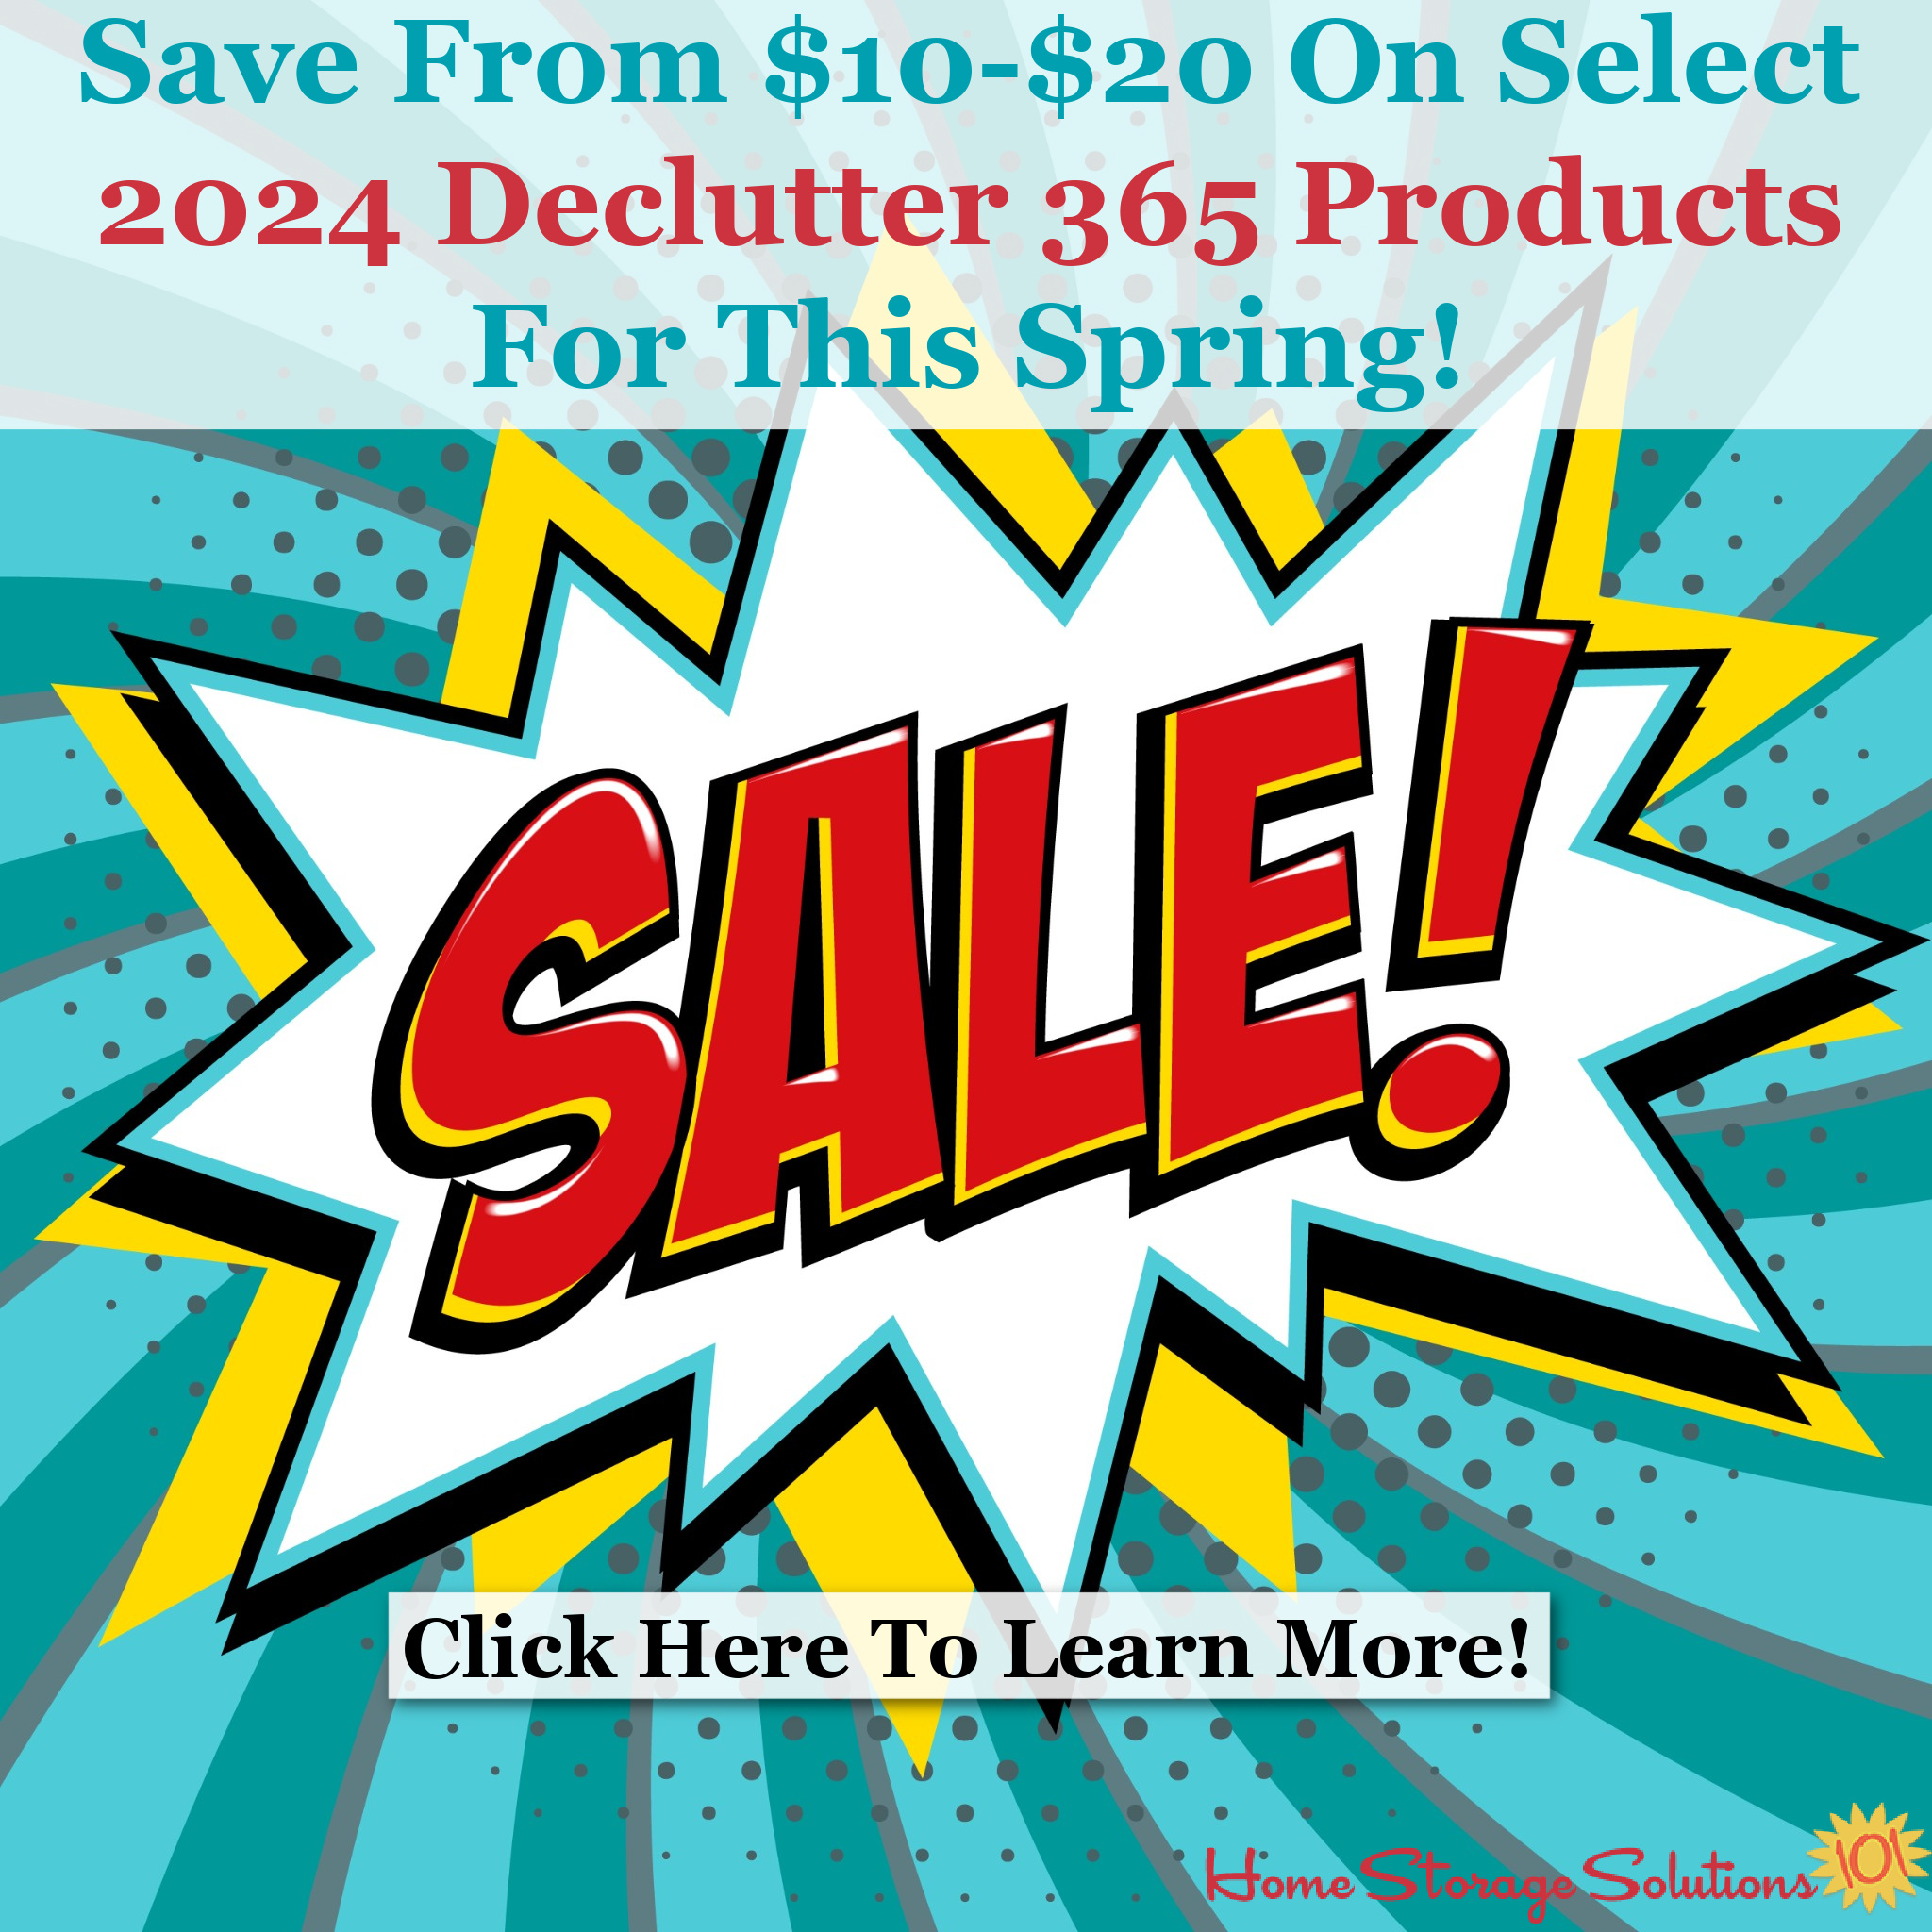 Click here to learn more about how to save the $10-$20 on select 2024 Declutter 365 products for this spring!